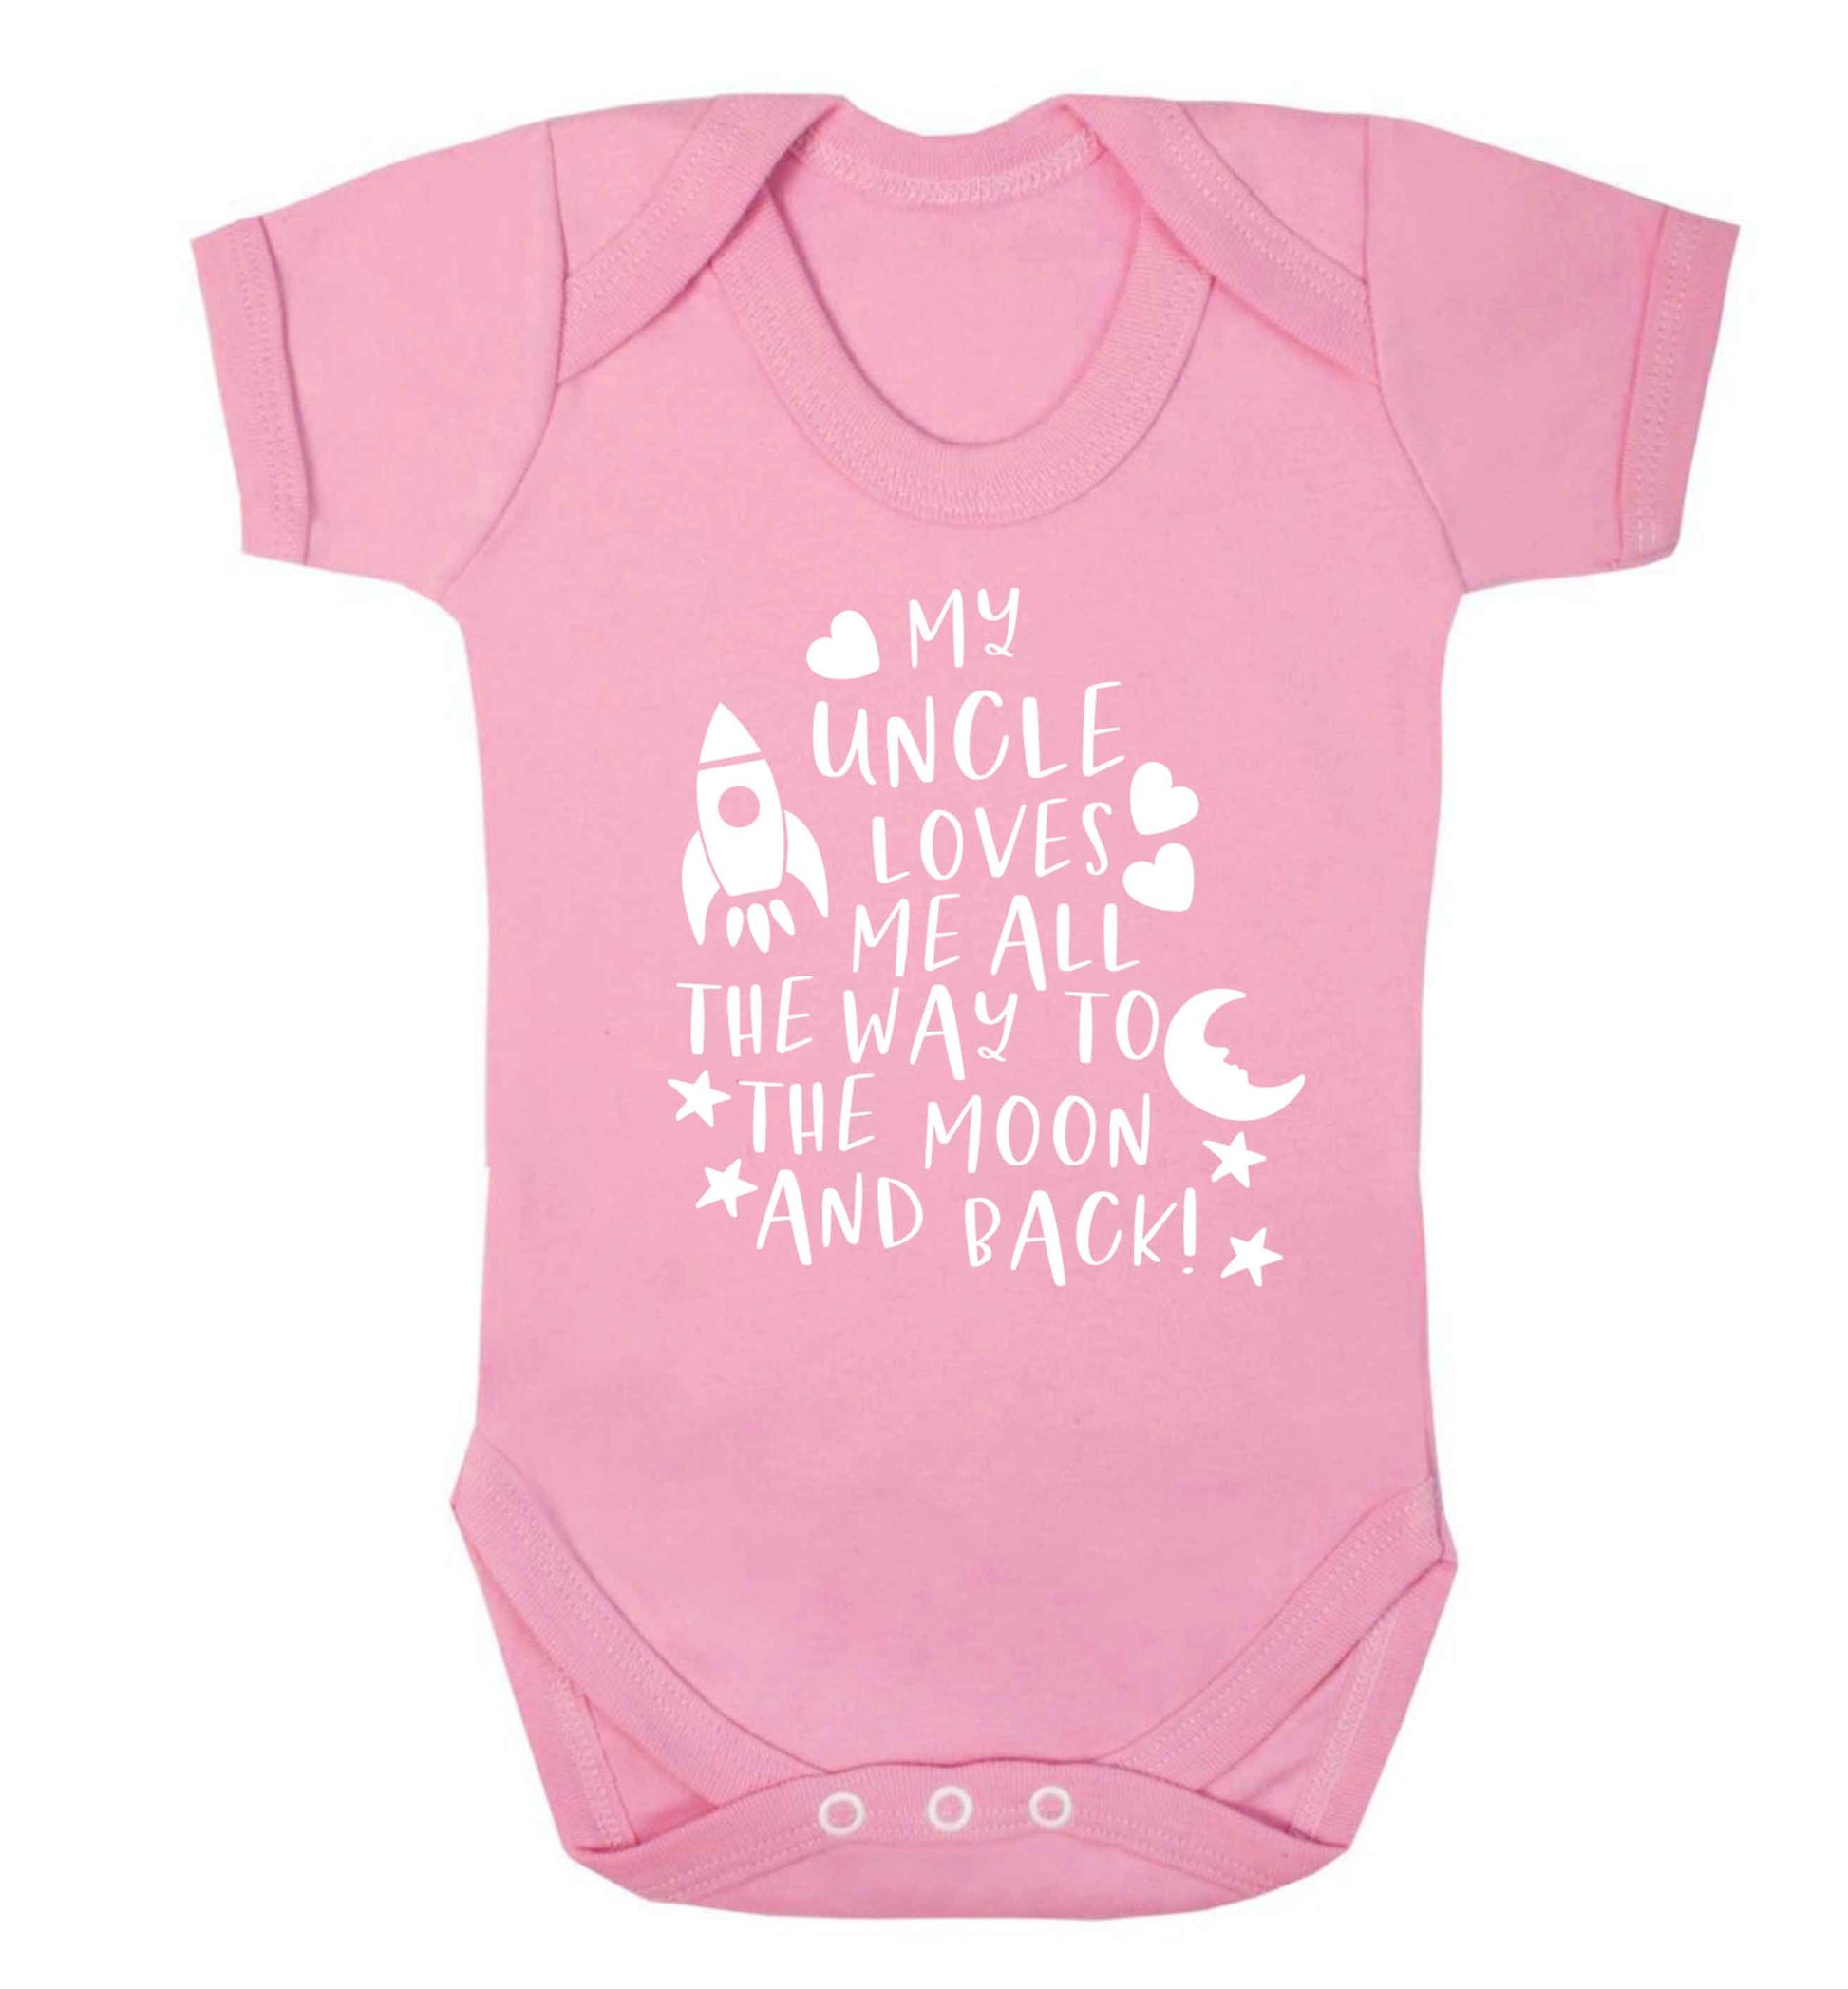 My uncle loves me all the way to the moon and back Baby Vest pale pink 18-24 months